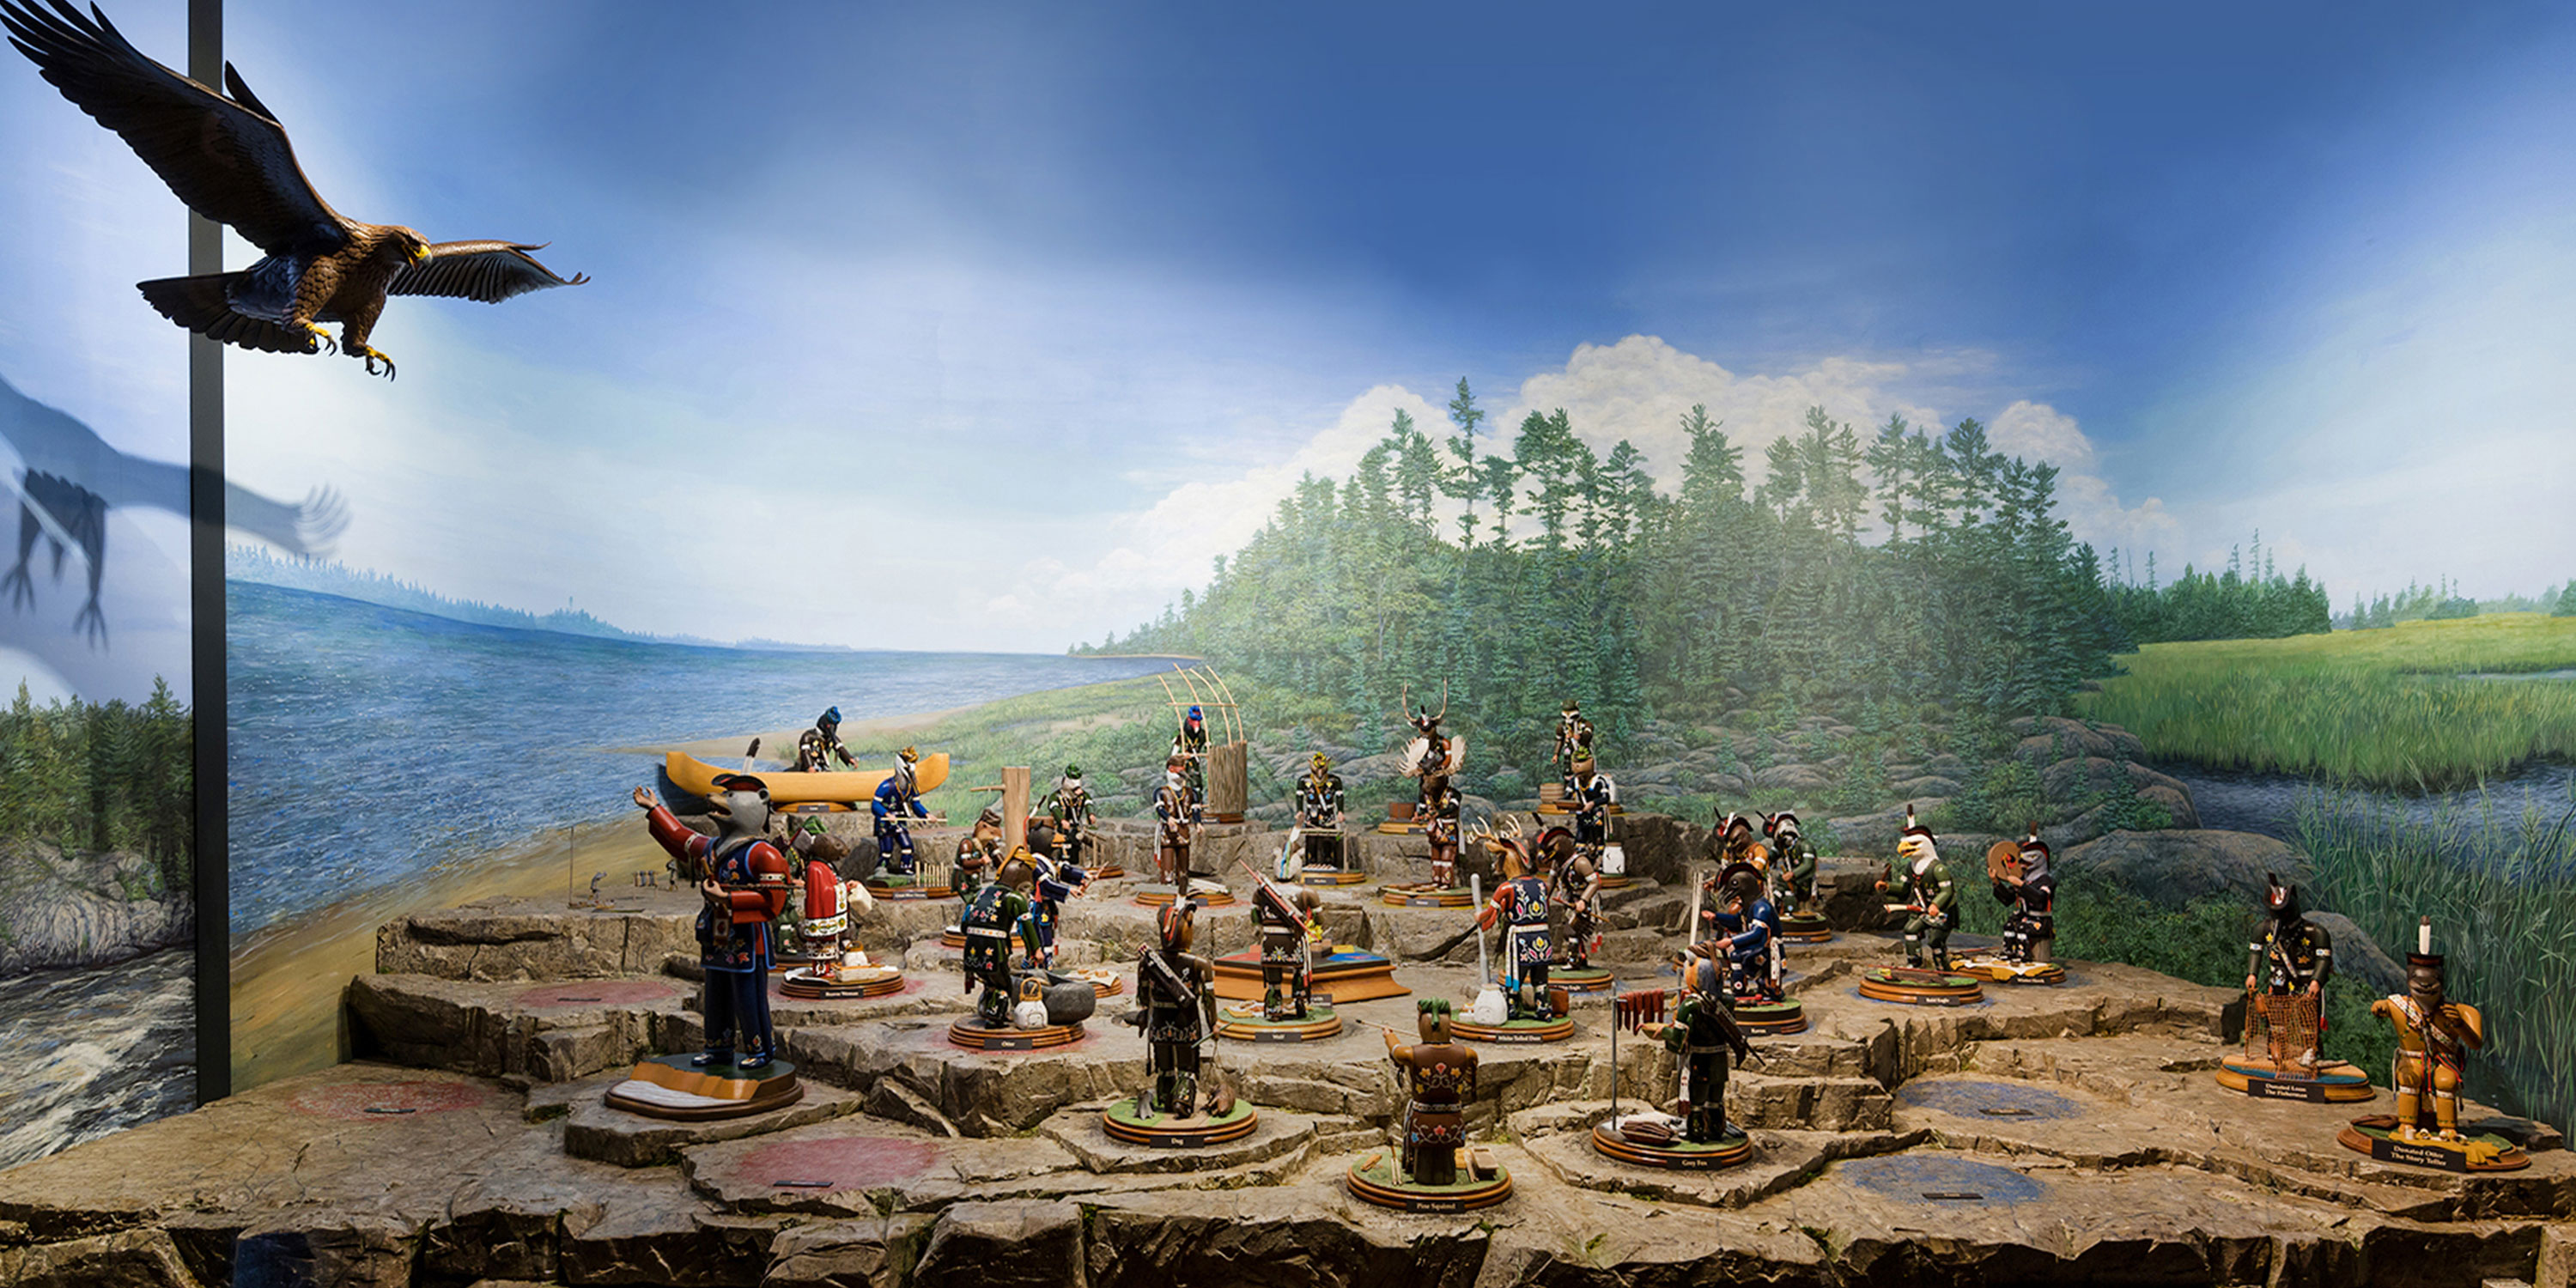 Gallery view of the hand-carved Menominee Clans Story figures